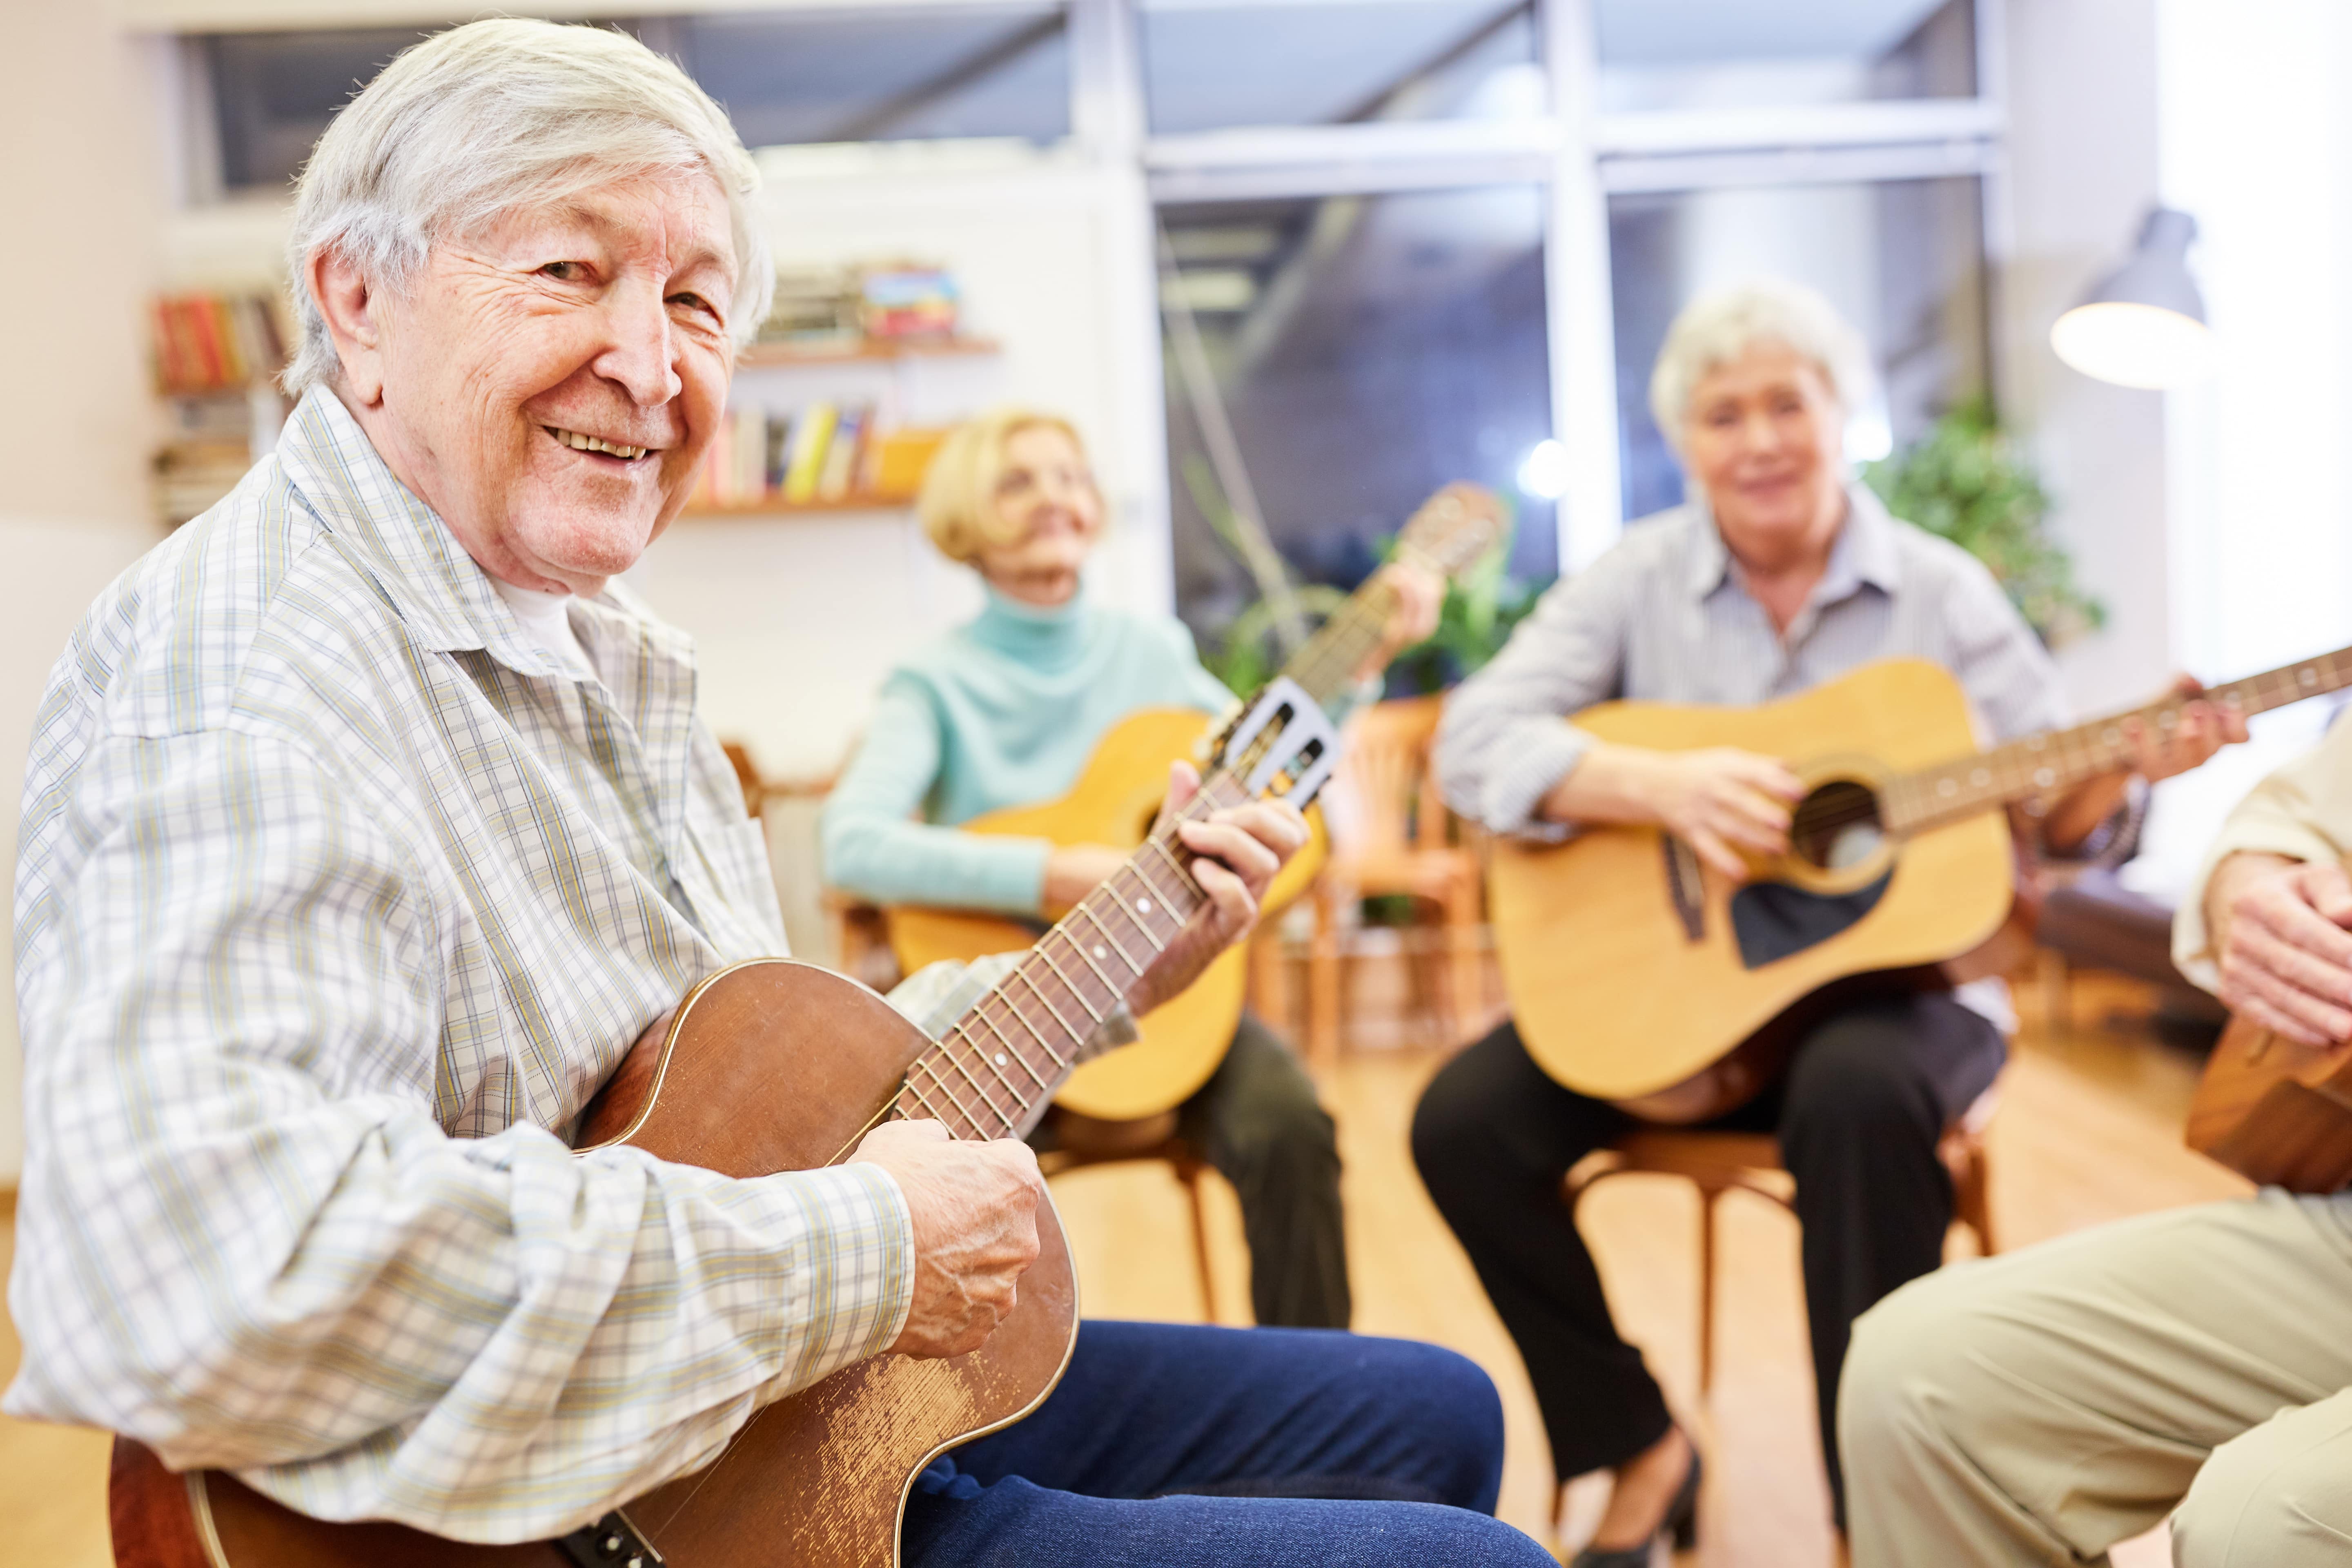 An older adult playing the guitar at a group music session